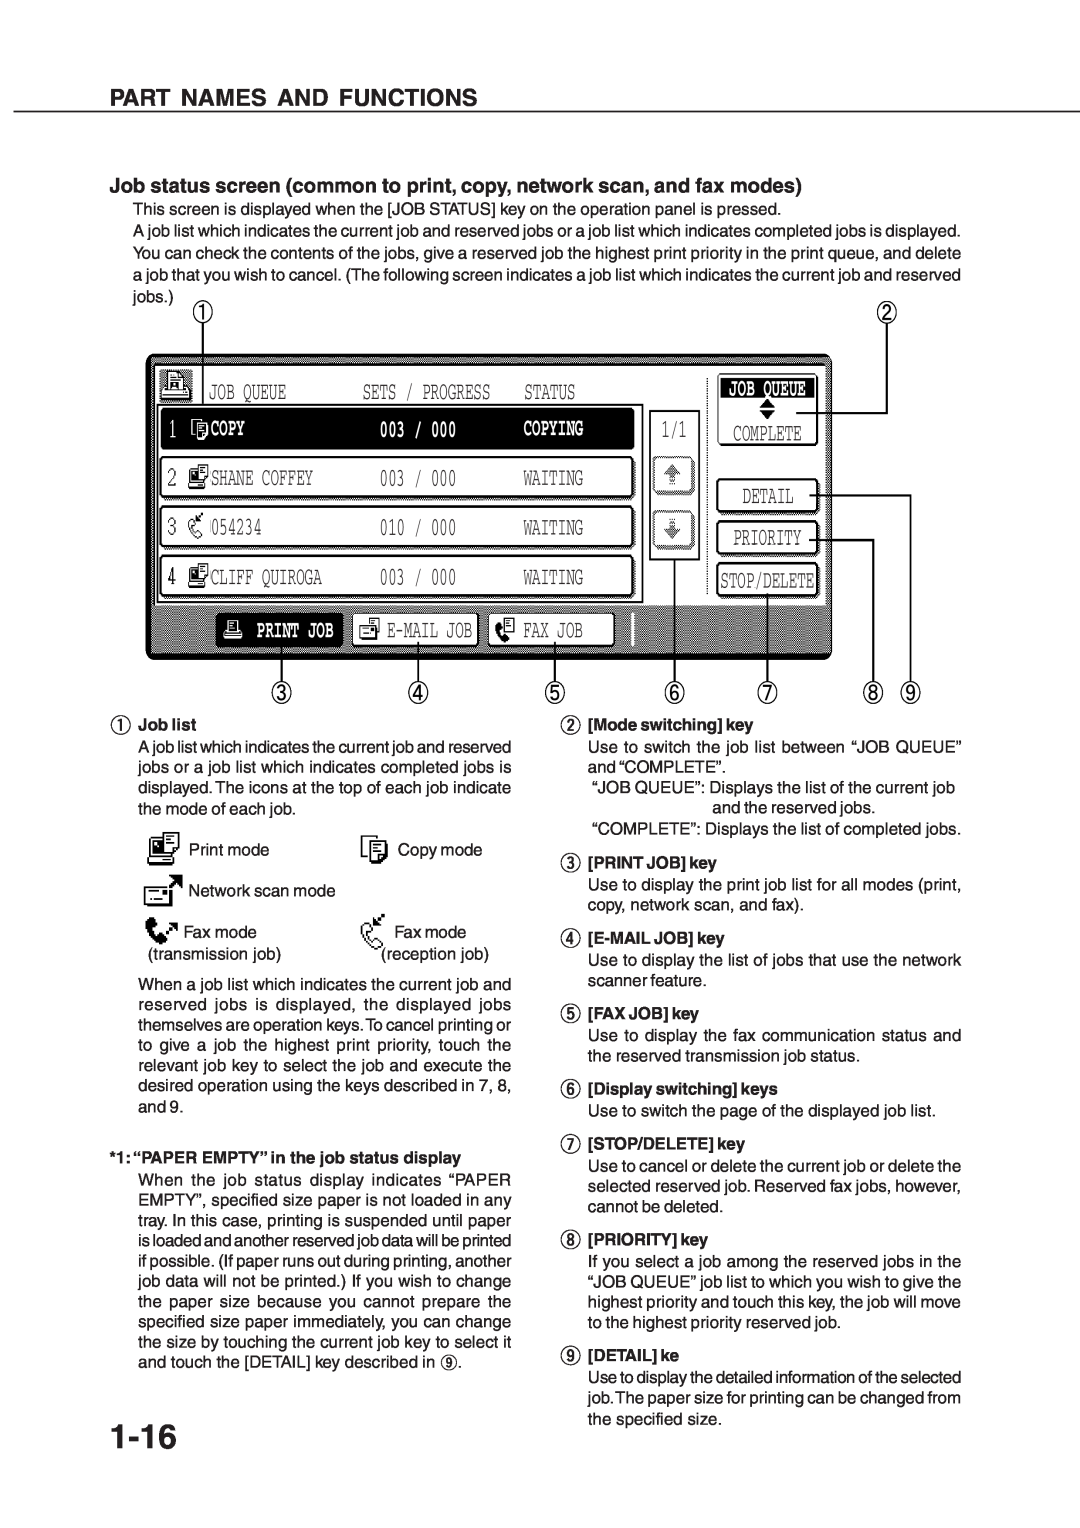 Sharp AR_M280 1-16, Job Queue, Job status screen common to print, copy, network scan, and fax modes, Copying, Waiting 